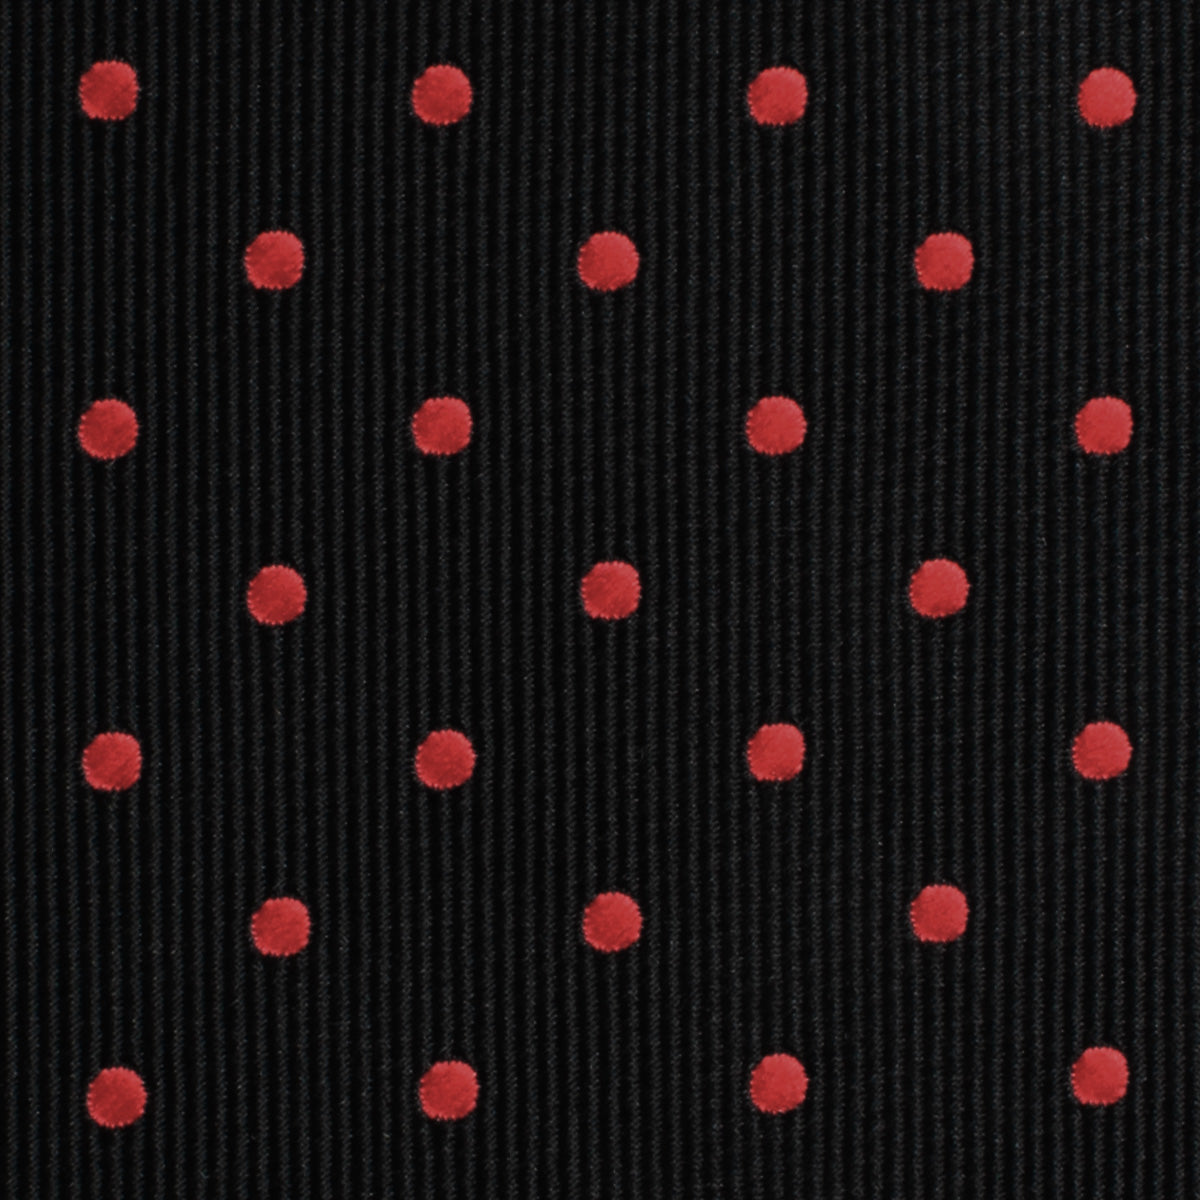 Black with Red Polka Dots Pocket Square Fabric